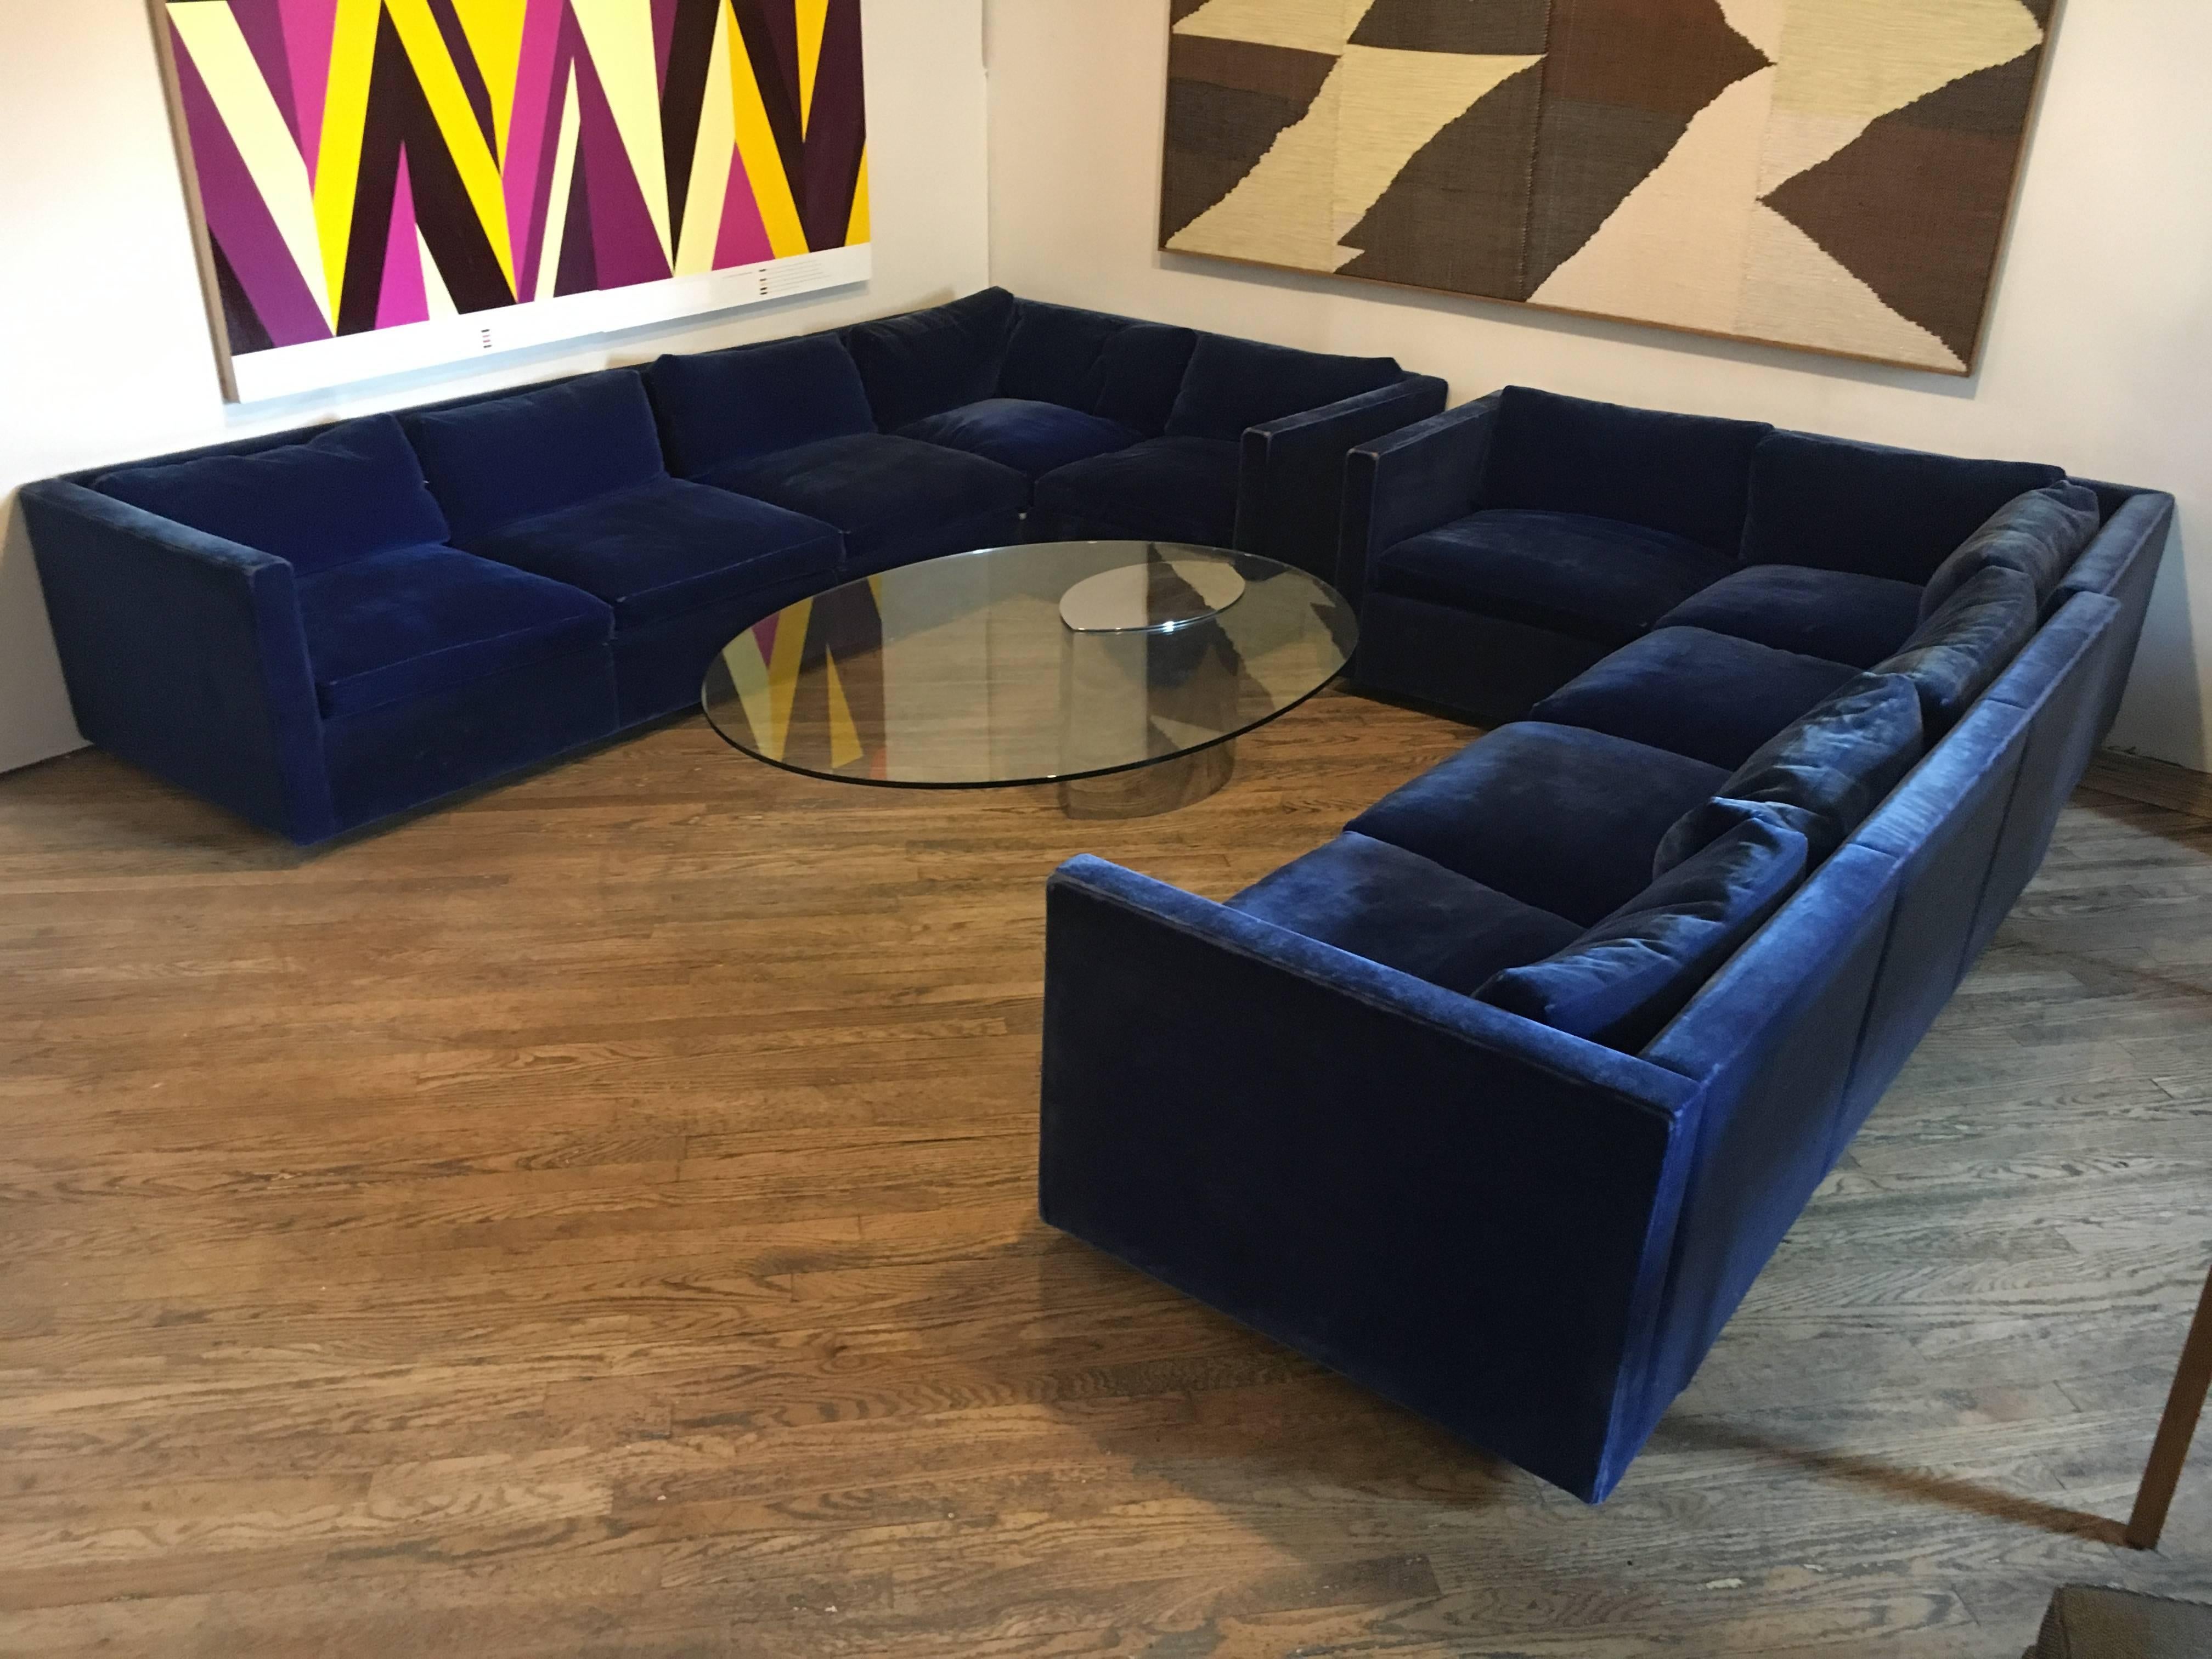 Late 20th Century Velvet Sectional Sofa by Charles Pfister for Knoll